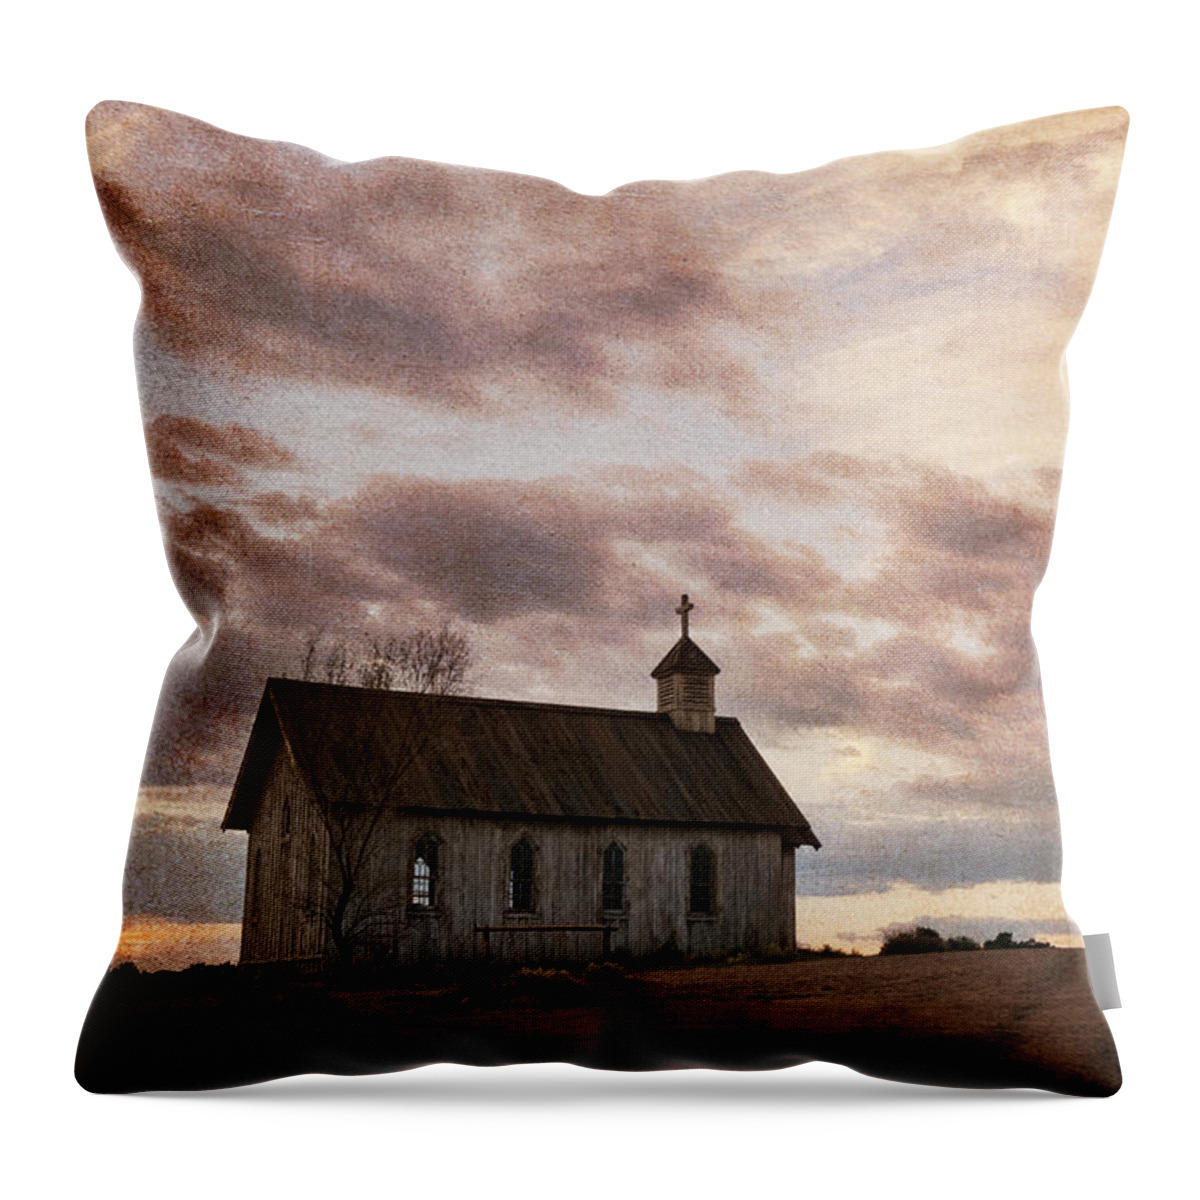 Landscape Throw Pillow featuring the photograph The Church by Mary Lee Dereske